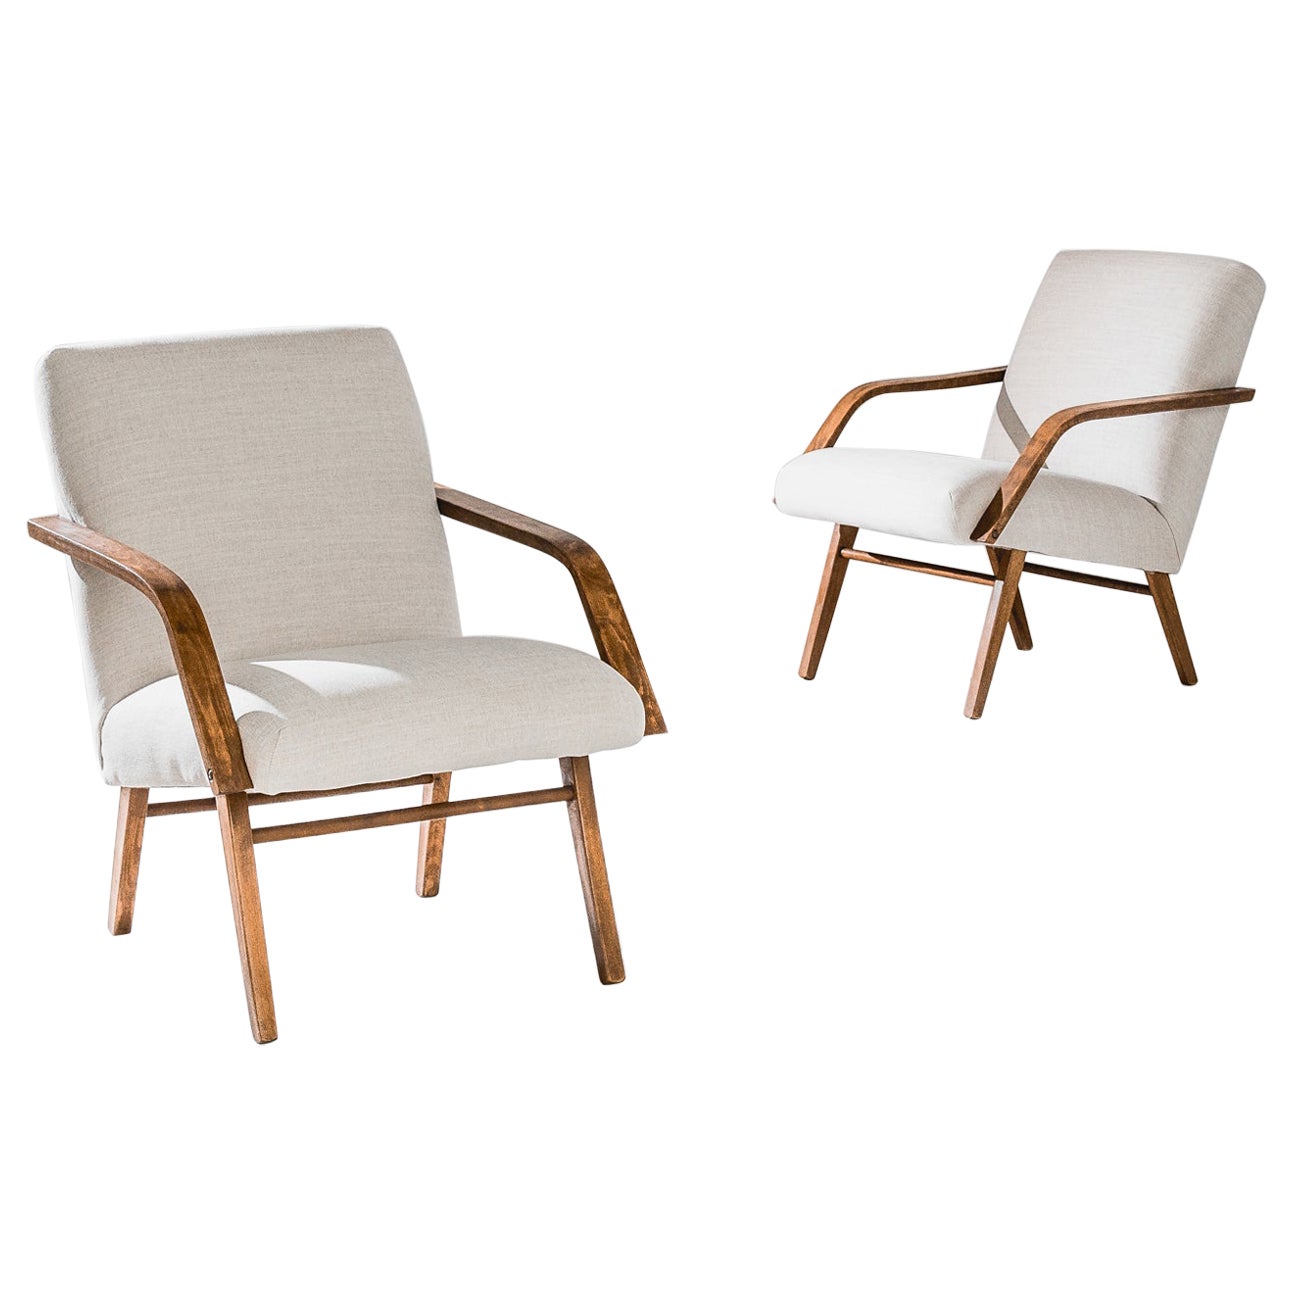 1960s Mid-Century Czech Armchairs, a Pair For Sale